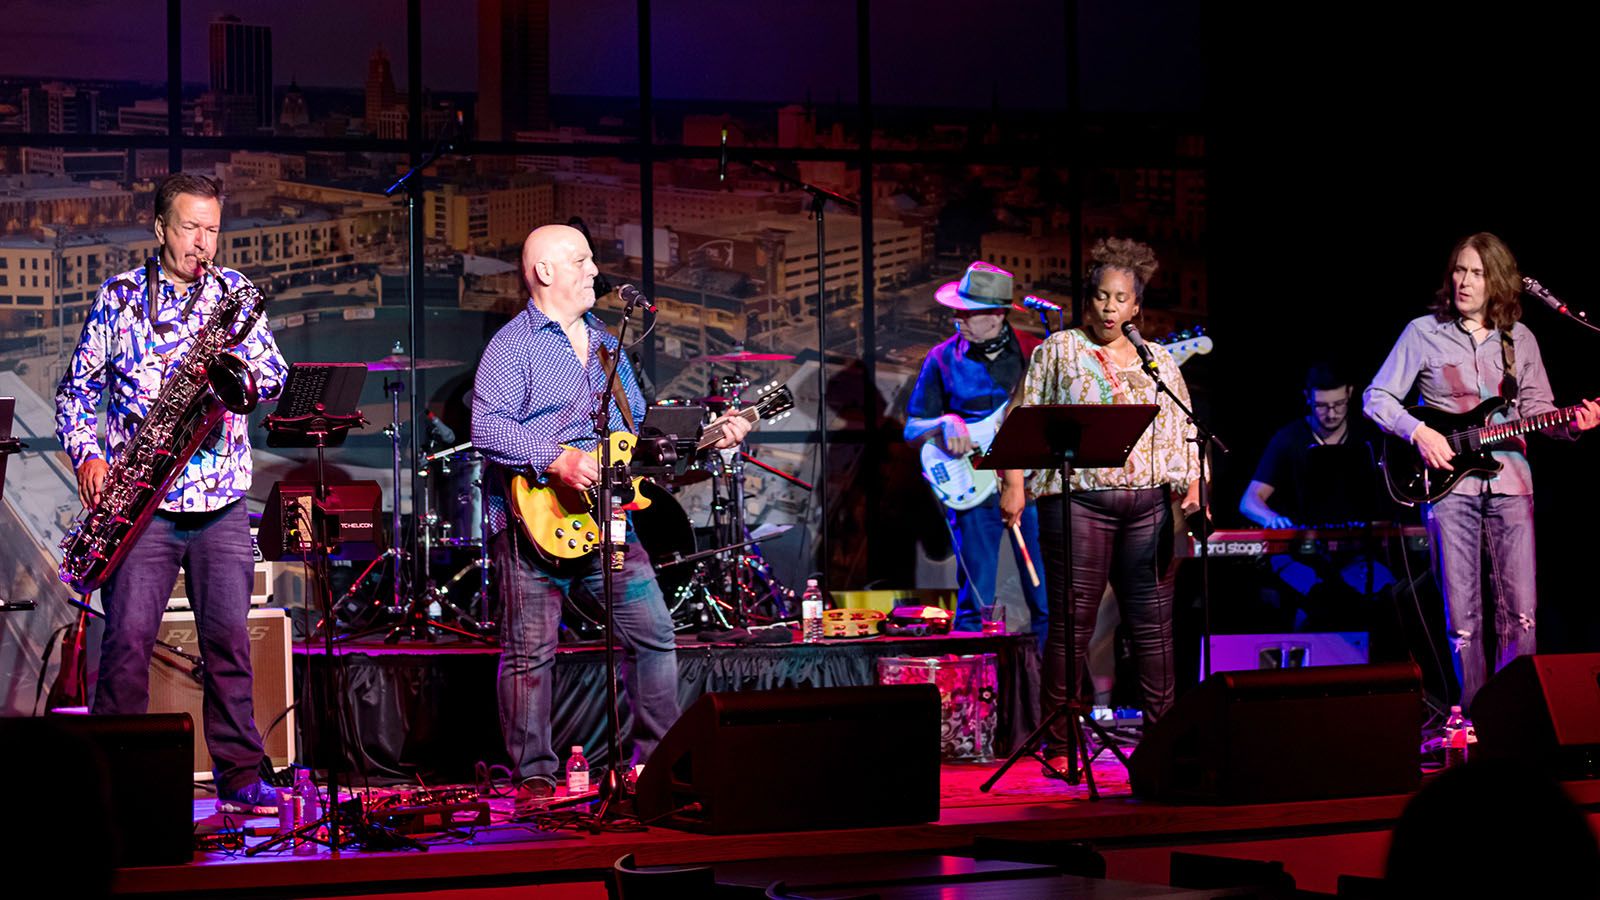 The Sweetwater All Stars will perform at Countdown at the Club Room on Dec. 31.